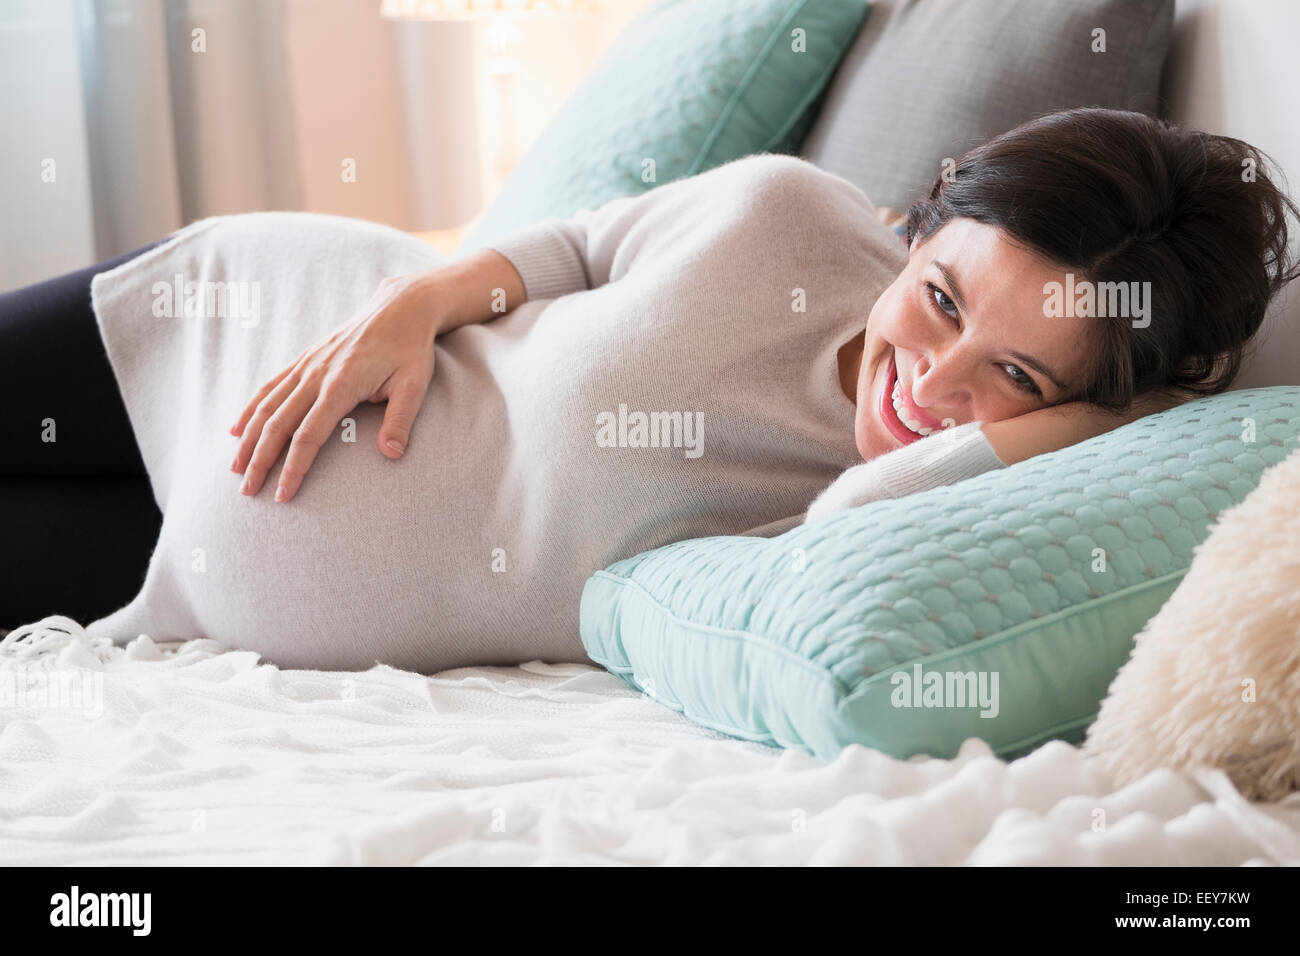 Pregnant woman in bed smiling Banque D'Images